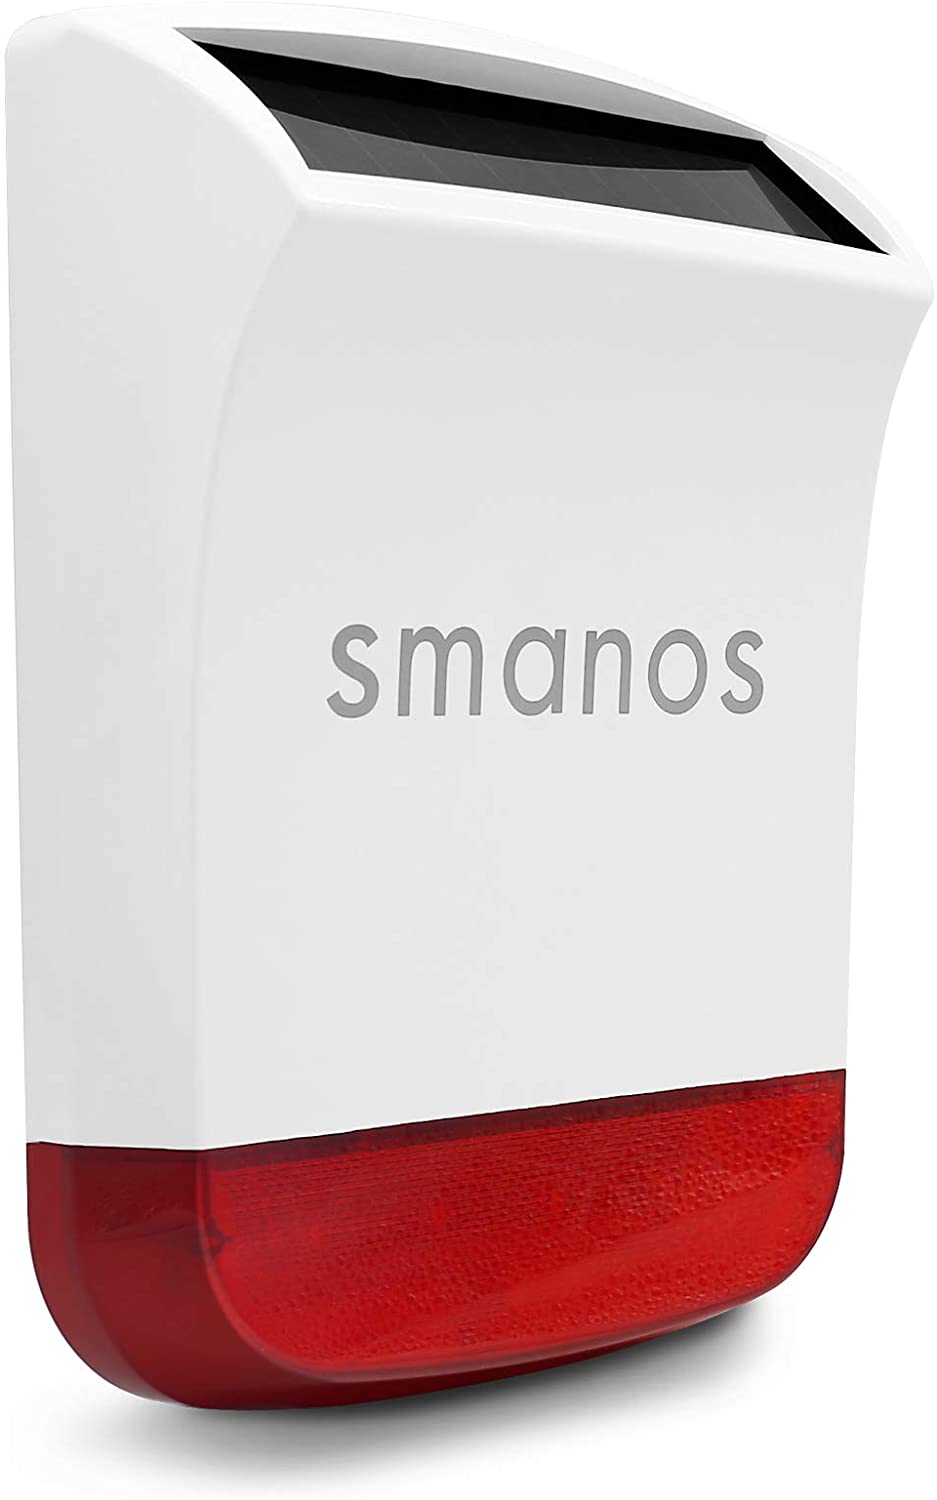 SMANOS SS2603 Solar Powered Siren - Wireless Outdoor Siren Works With Select Smanos Hubs, Also Works With Smanos Remote Controls, Door/window Sensors And PIR Detectors - White/Red